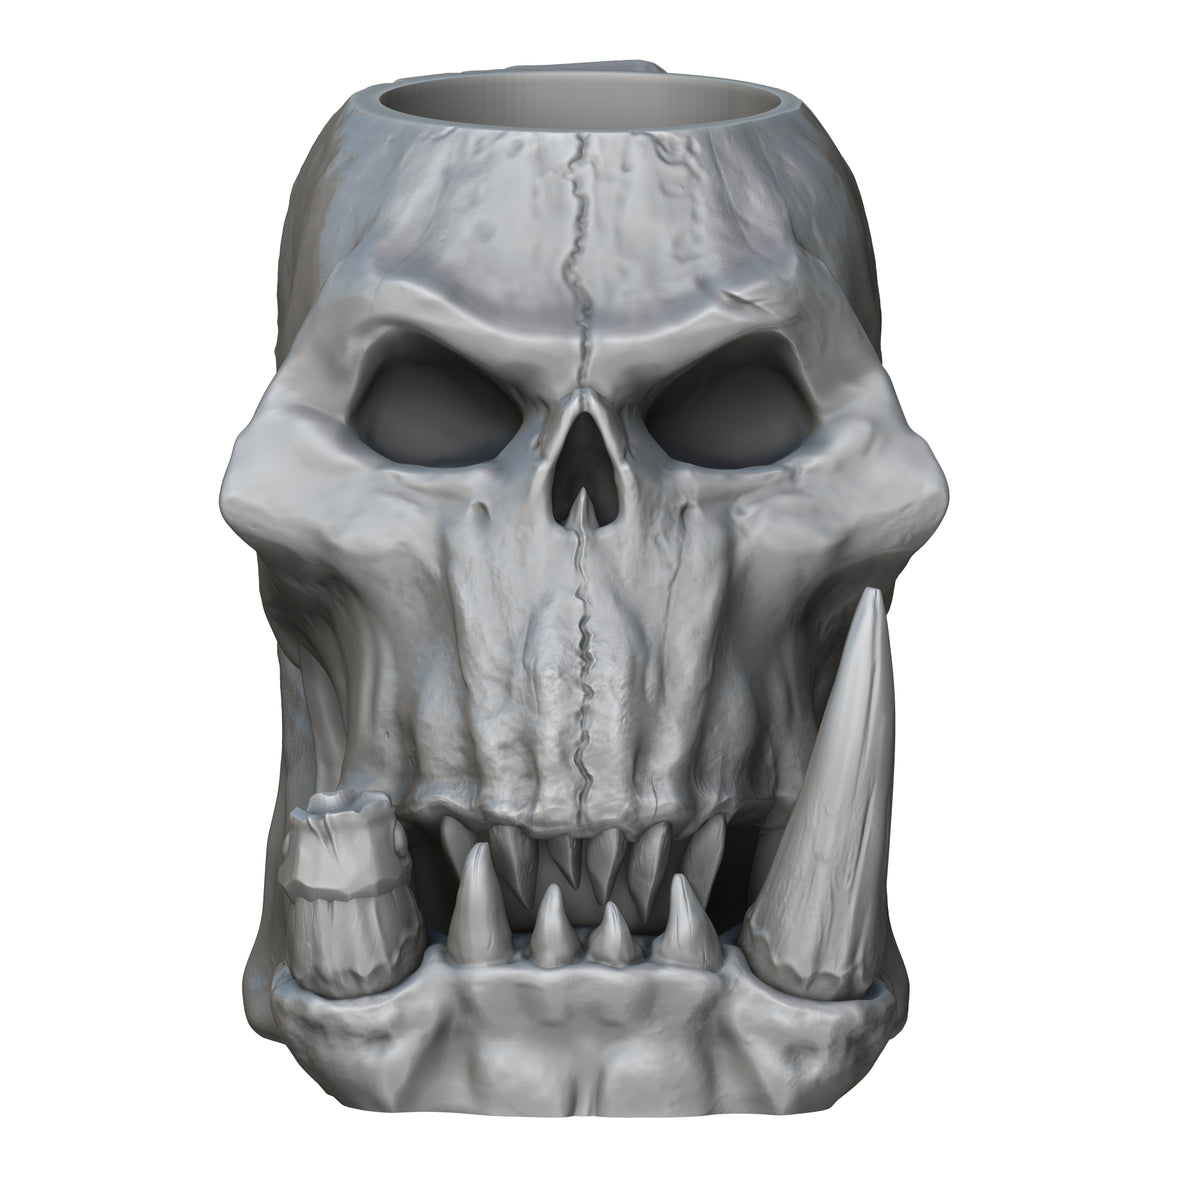 The Orc Skull Themed Mythic Mug with FREE Insert/Riser